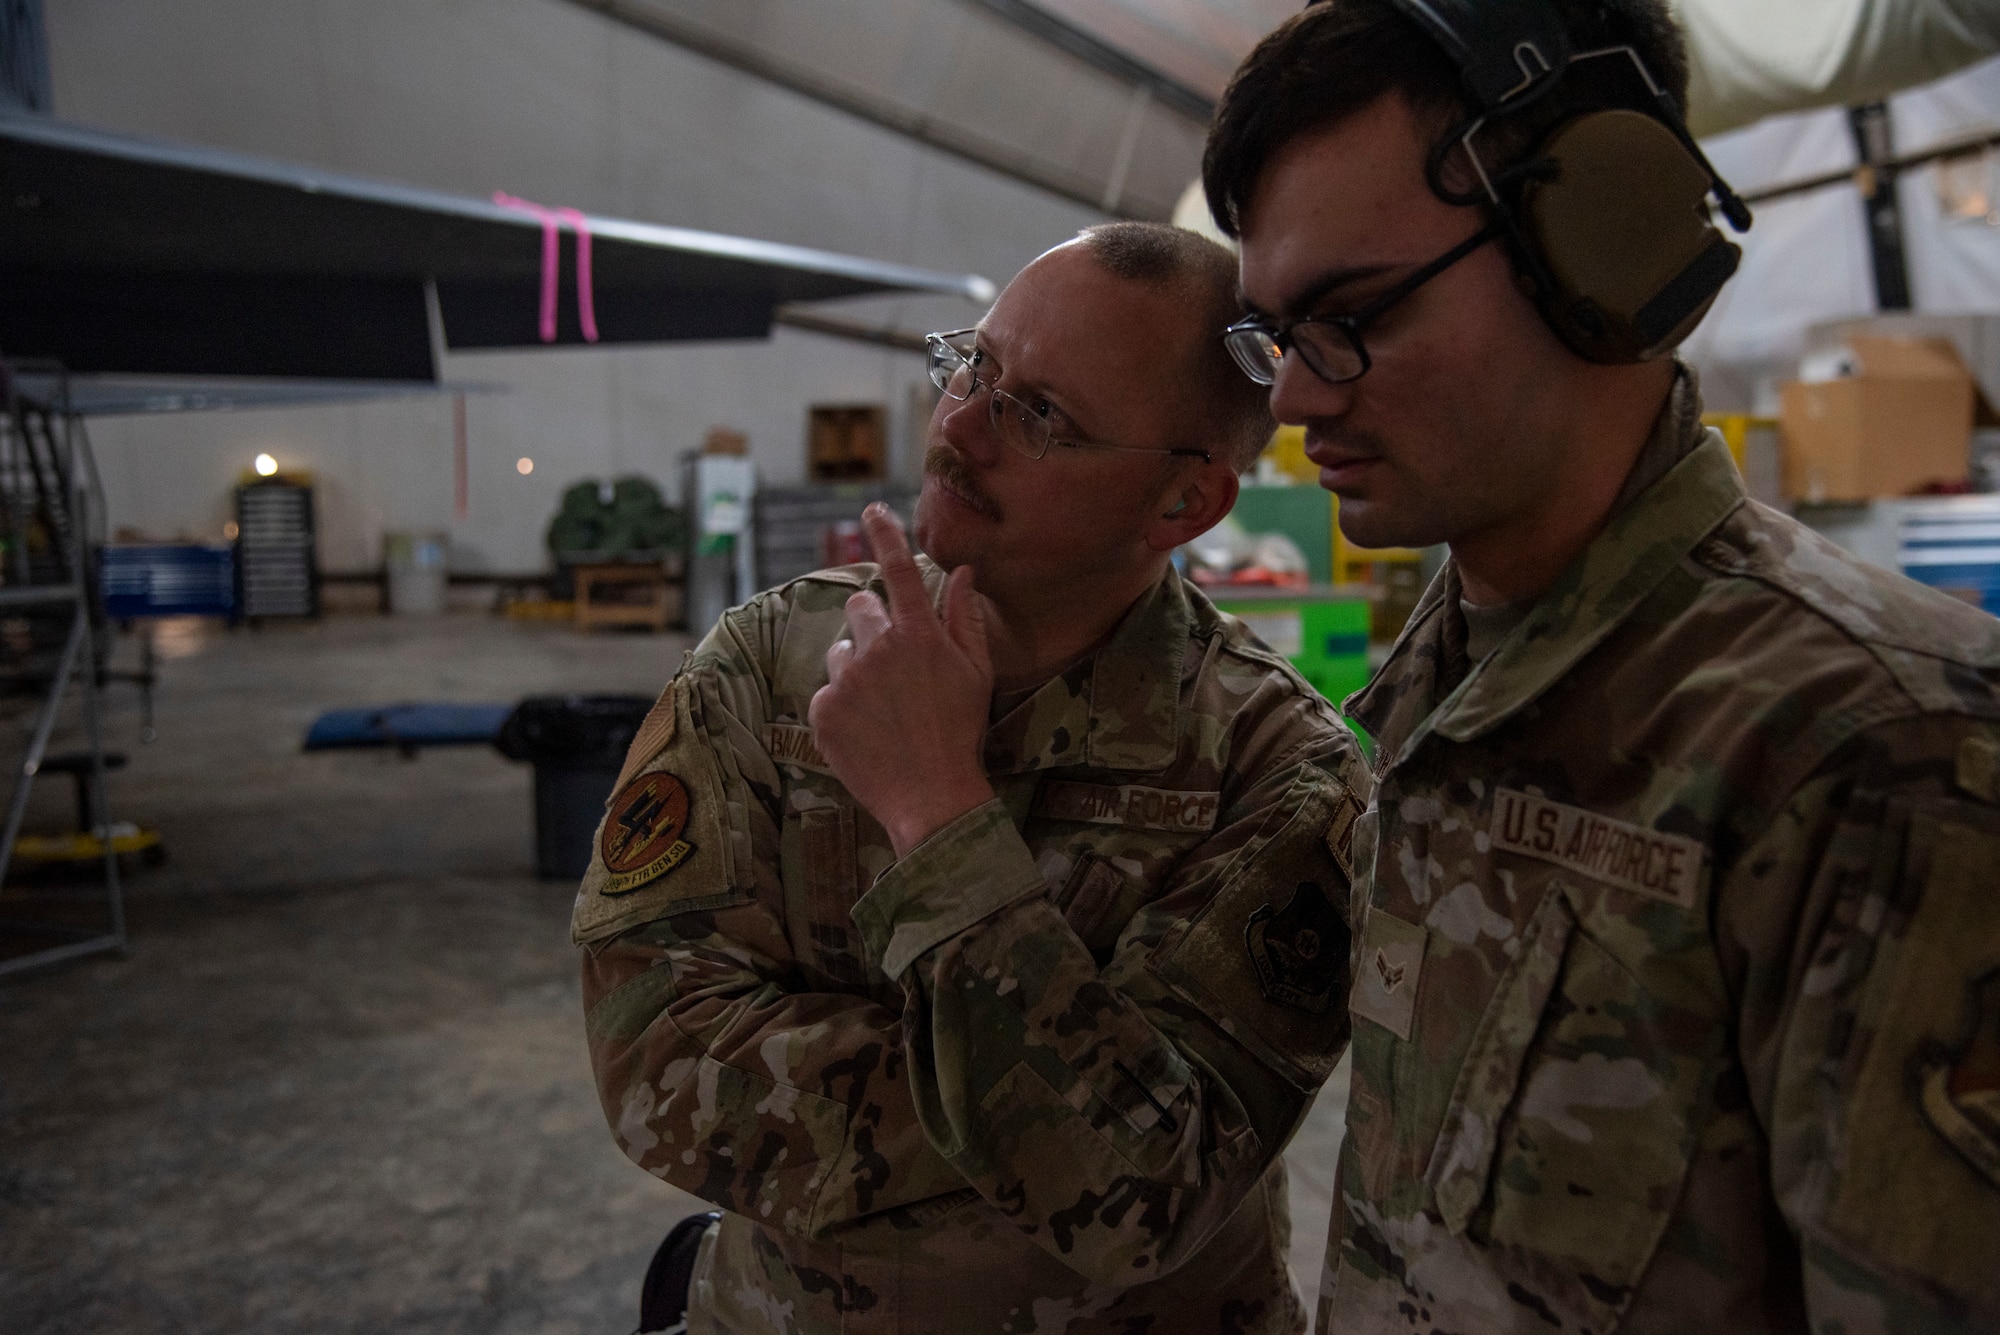 Master Sgt. David Baumberger, 389th Expeditionary Fighter Generation Squadron, Specialist Section Chief (left), speaks with Senior Airman Elijah Gardner, 332d Expeditionary Civil Engineer Programs specialist. Gardner is participating in "Maintainer for a Day" at an undisclosed location, Southwest Asia, Nov. 25, 2022. "Maintainer for a Day" is a program that allows Airmen from diverse career fields to experience what it’s like to perform maintenance and repair work on an aircraft. (U.S. Air Force photo by: Tech. Sgt. Jim Bentley)